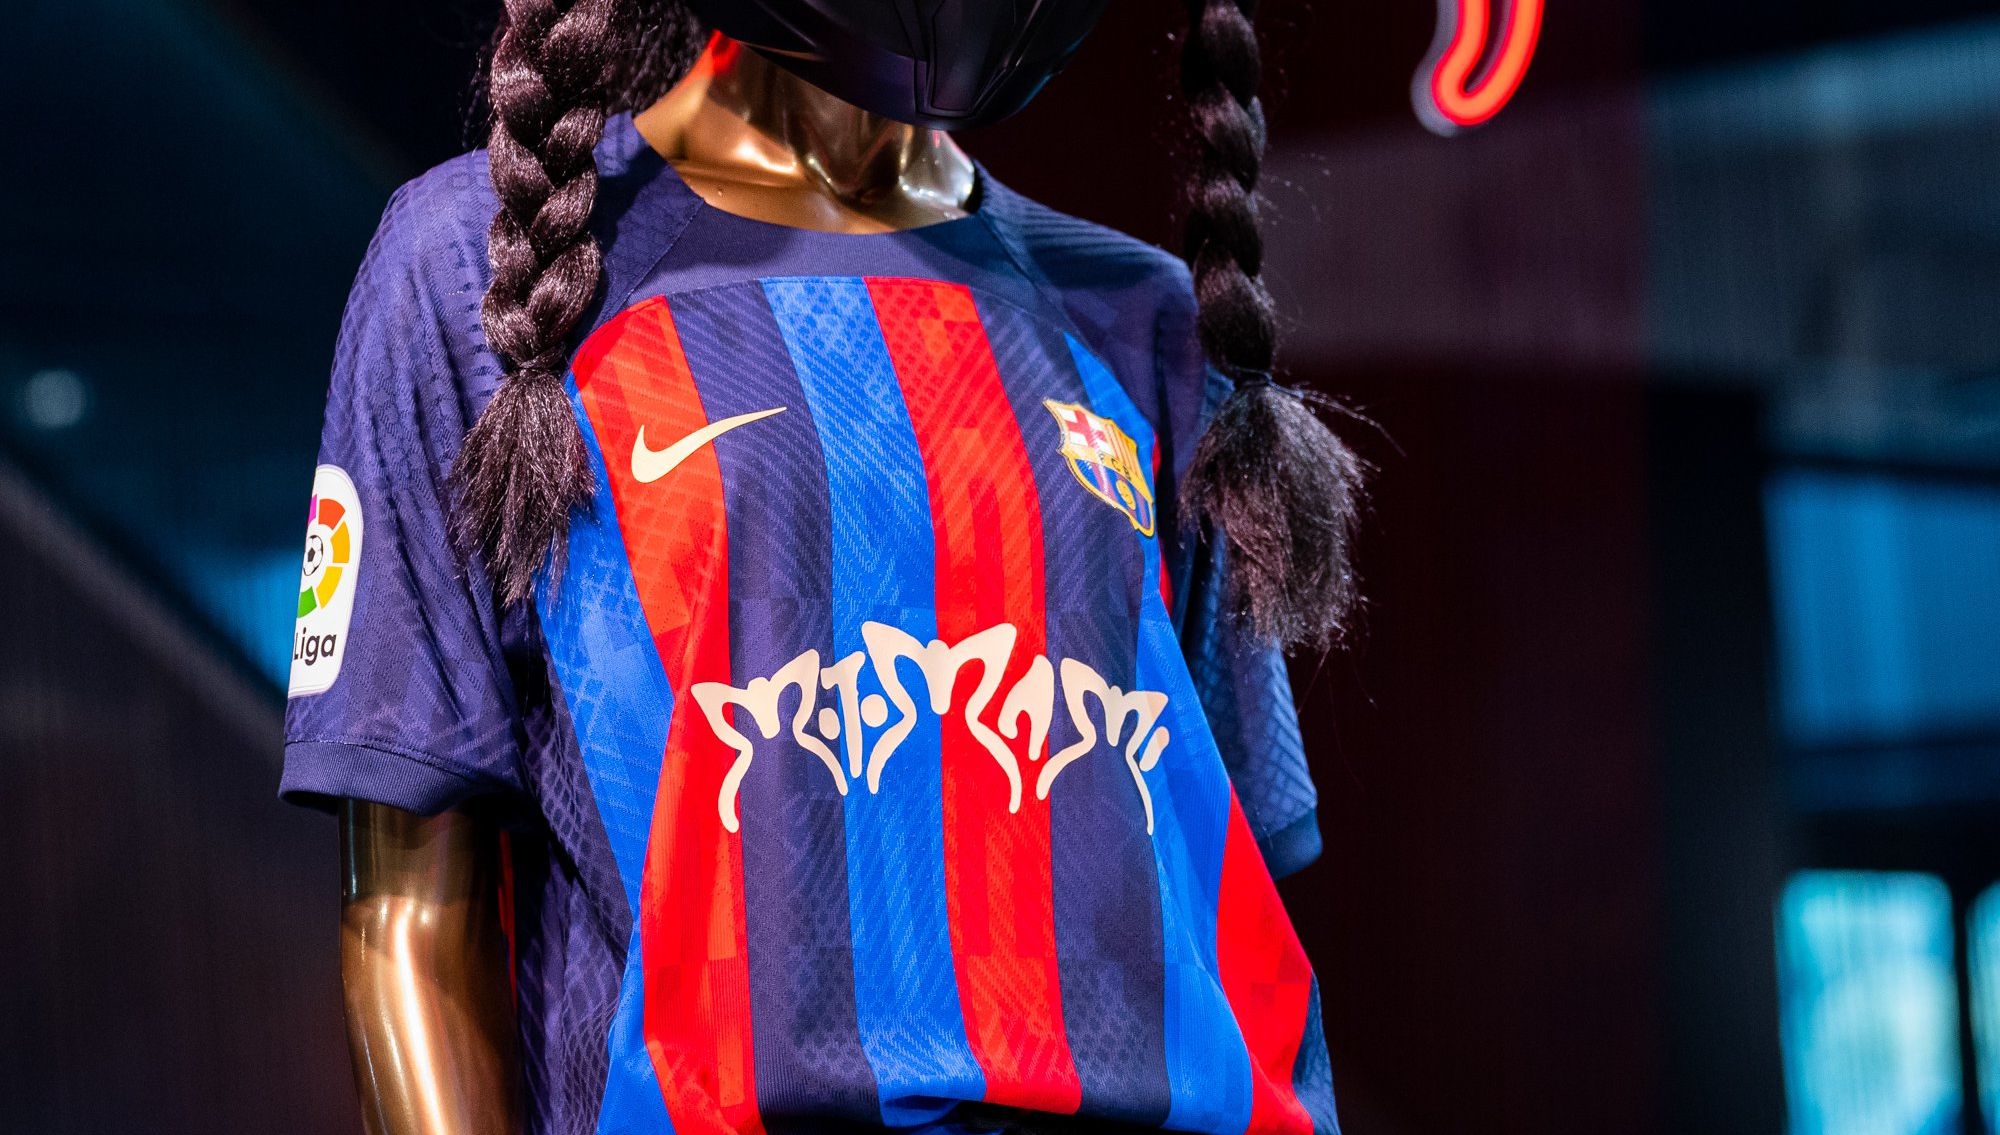 Barcelona release special Rosalia shirt for El Clasico as part of